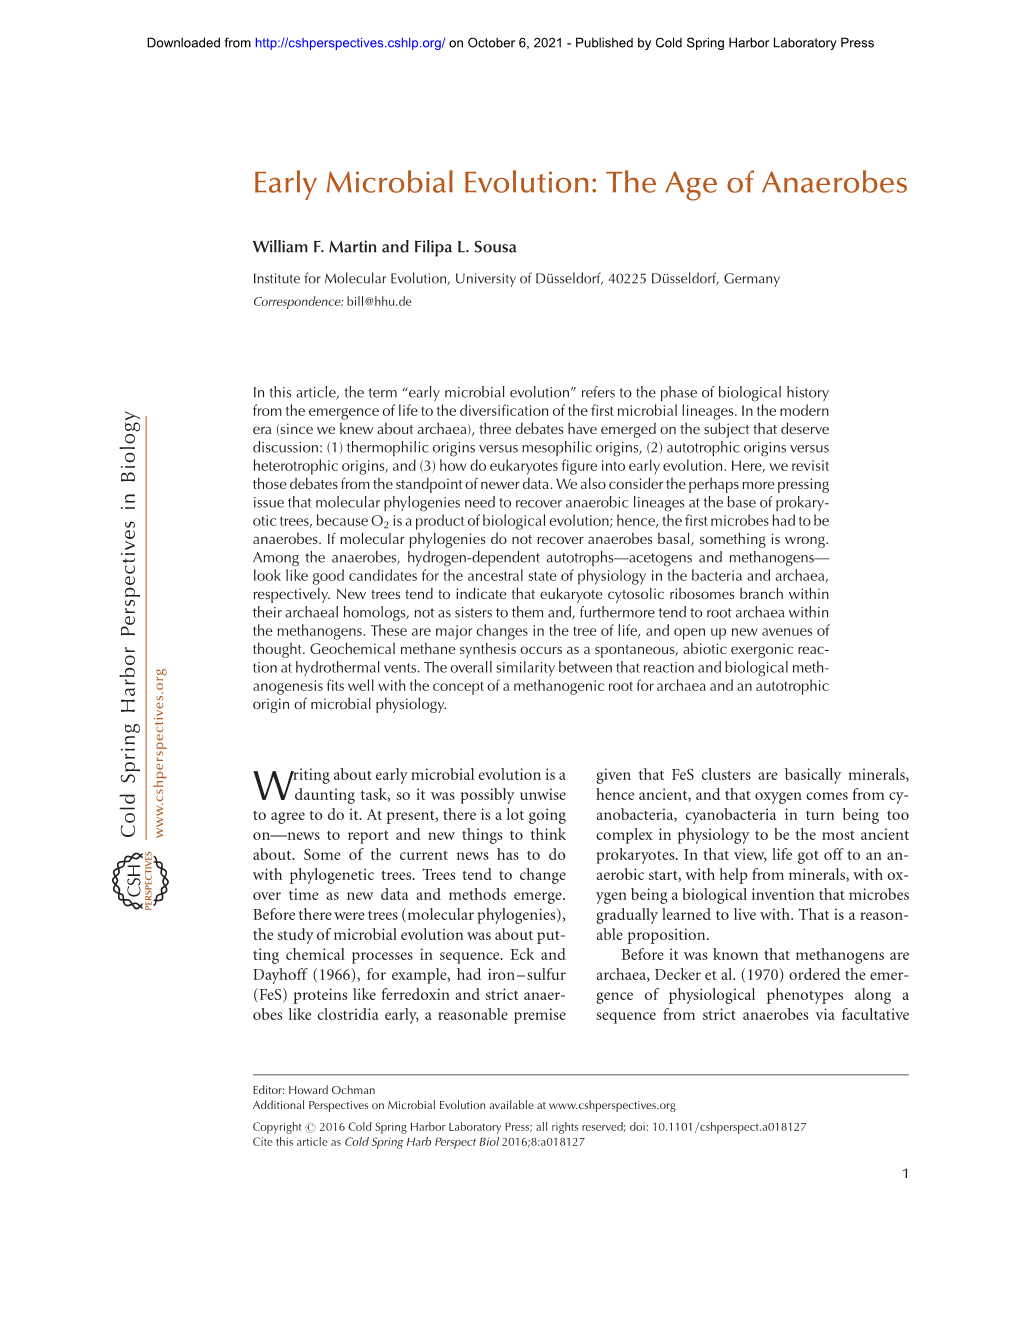 Early Microbial Evolution: the Age of Anaerobes